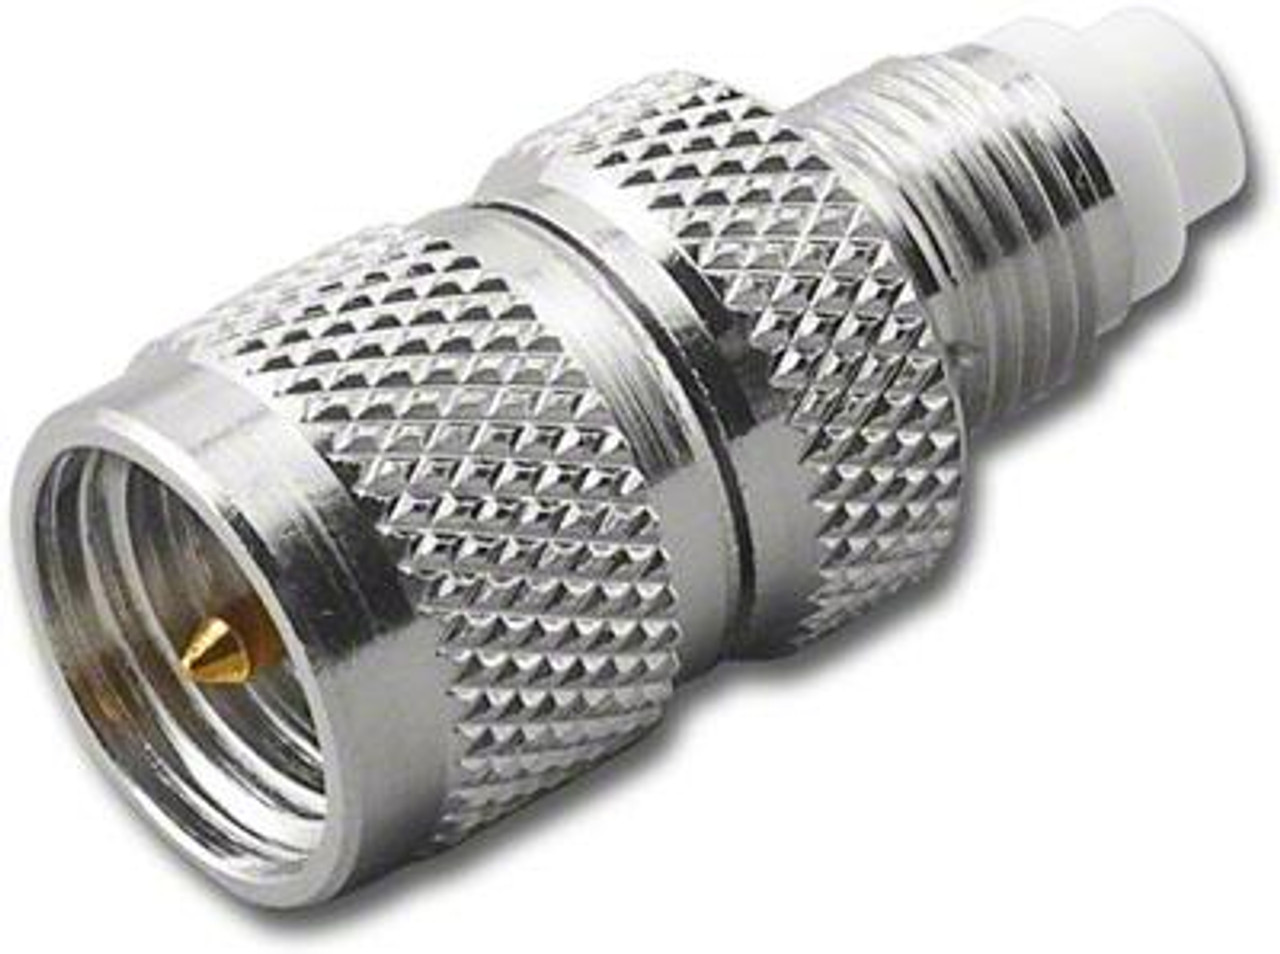 OPEK AT-8017 - FME-Female to Mini-UHF Male Coaxial Adapter Connector